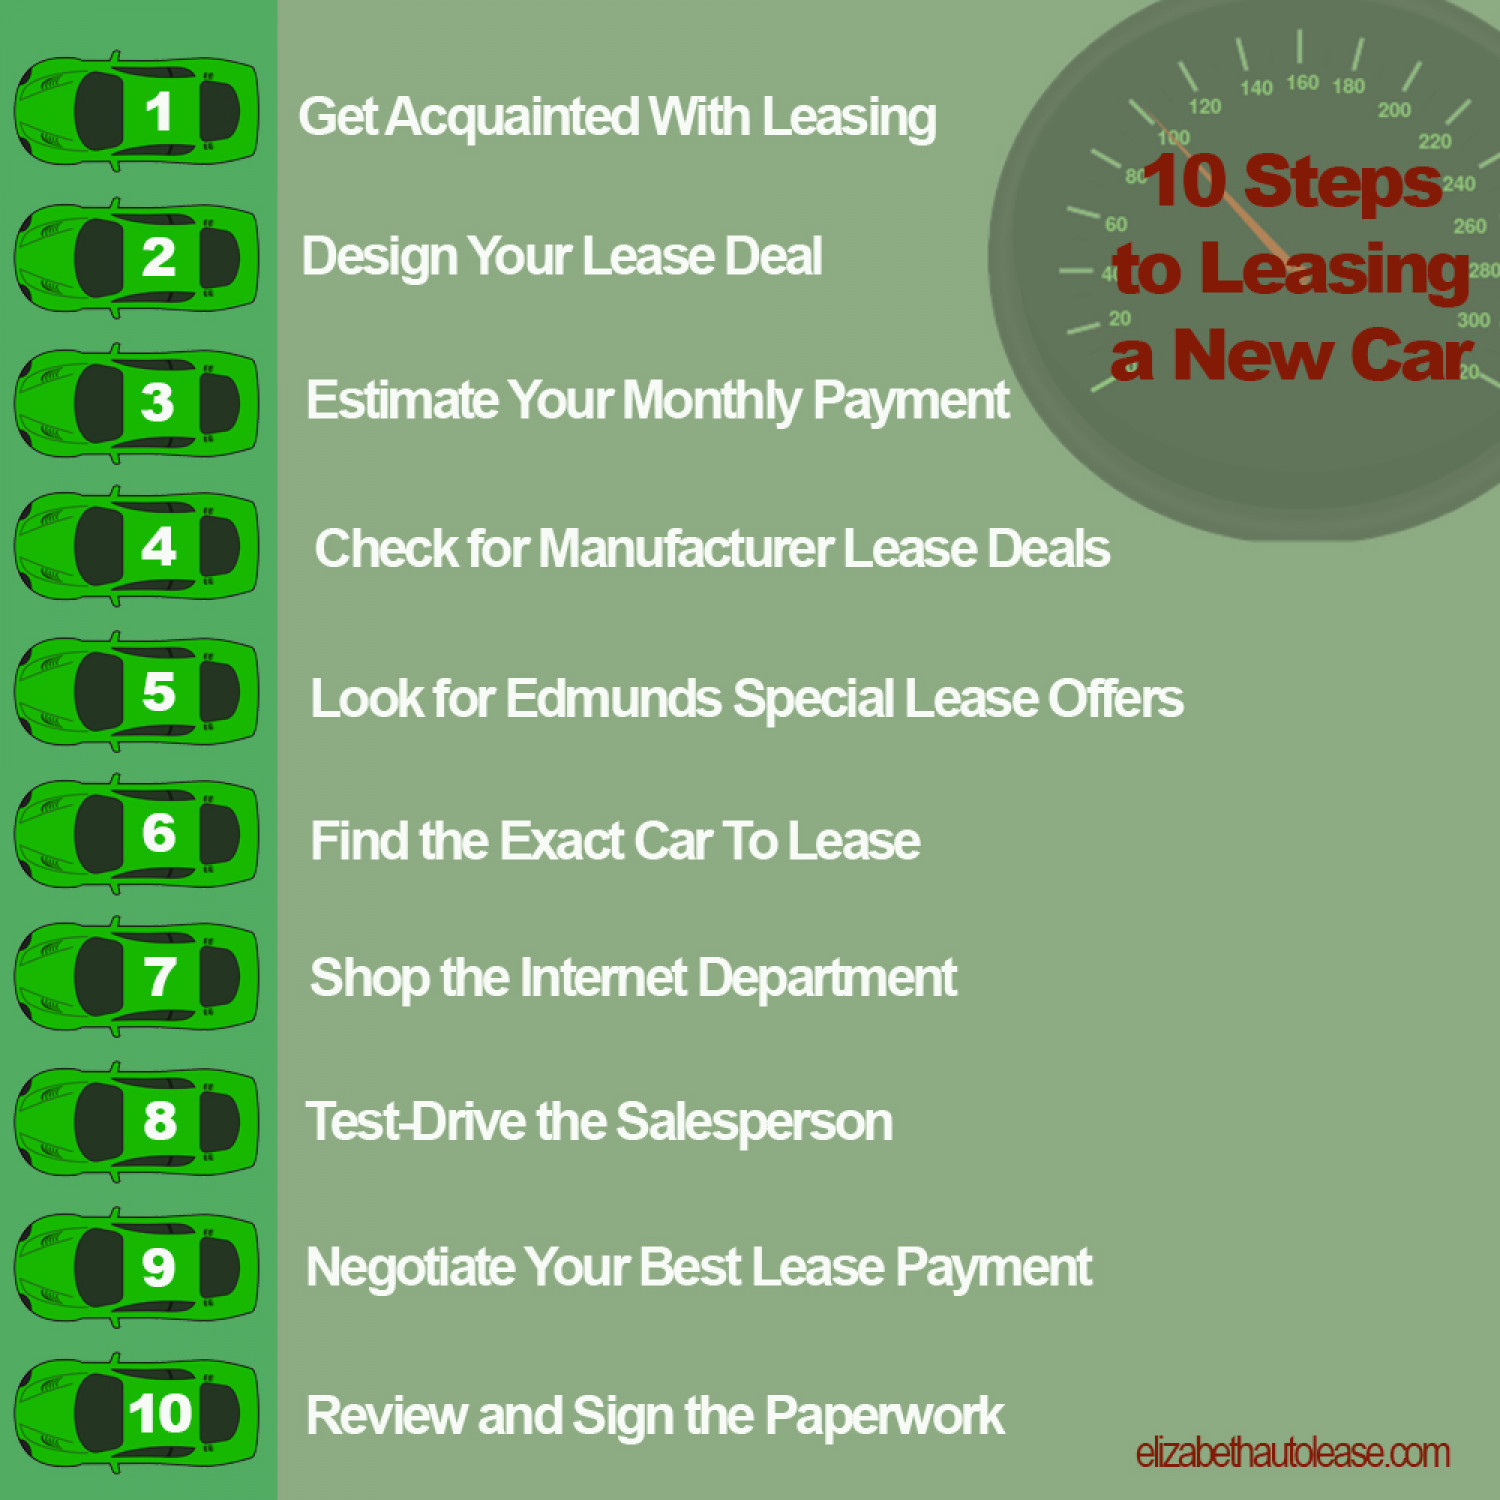 10 Steps to Leasing a New Car Infographic